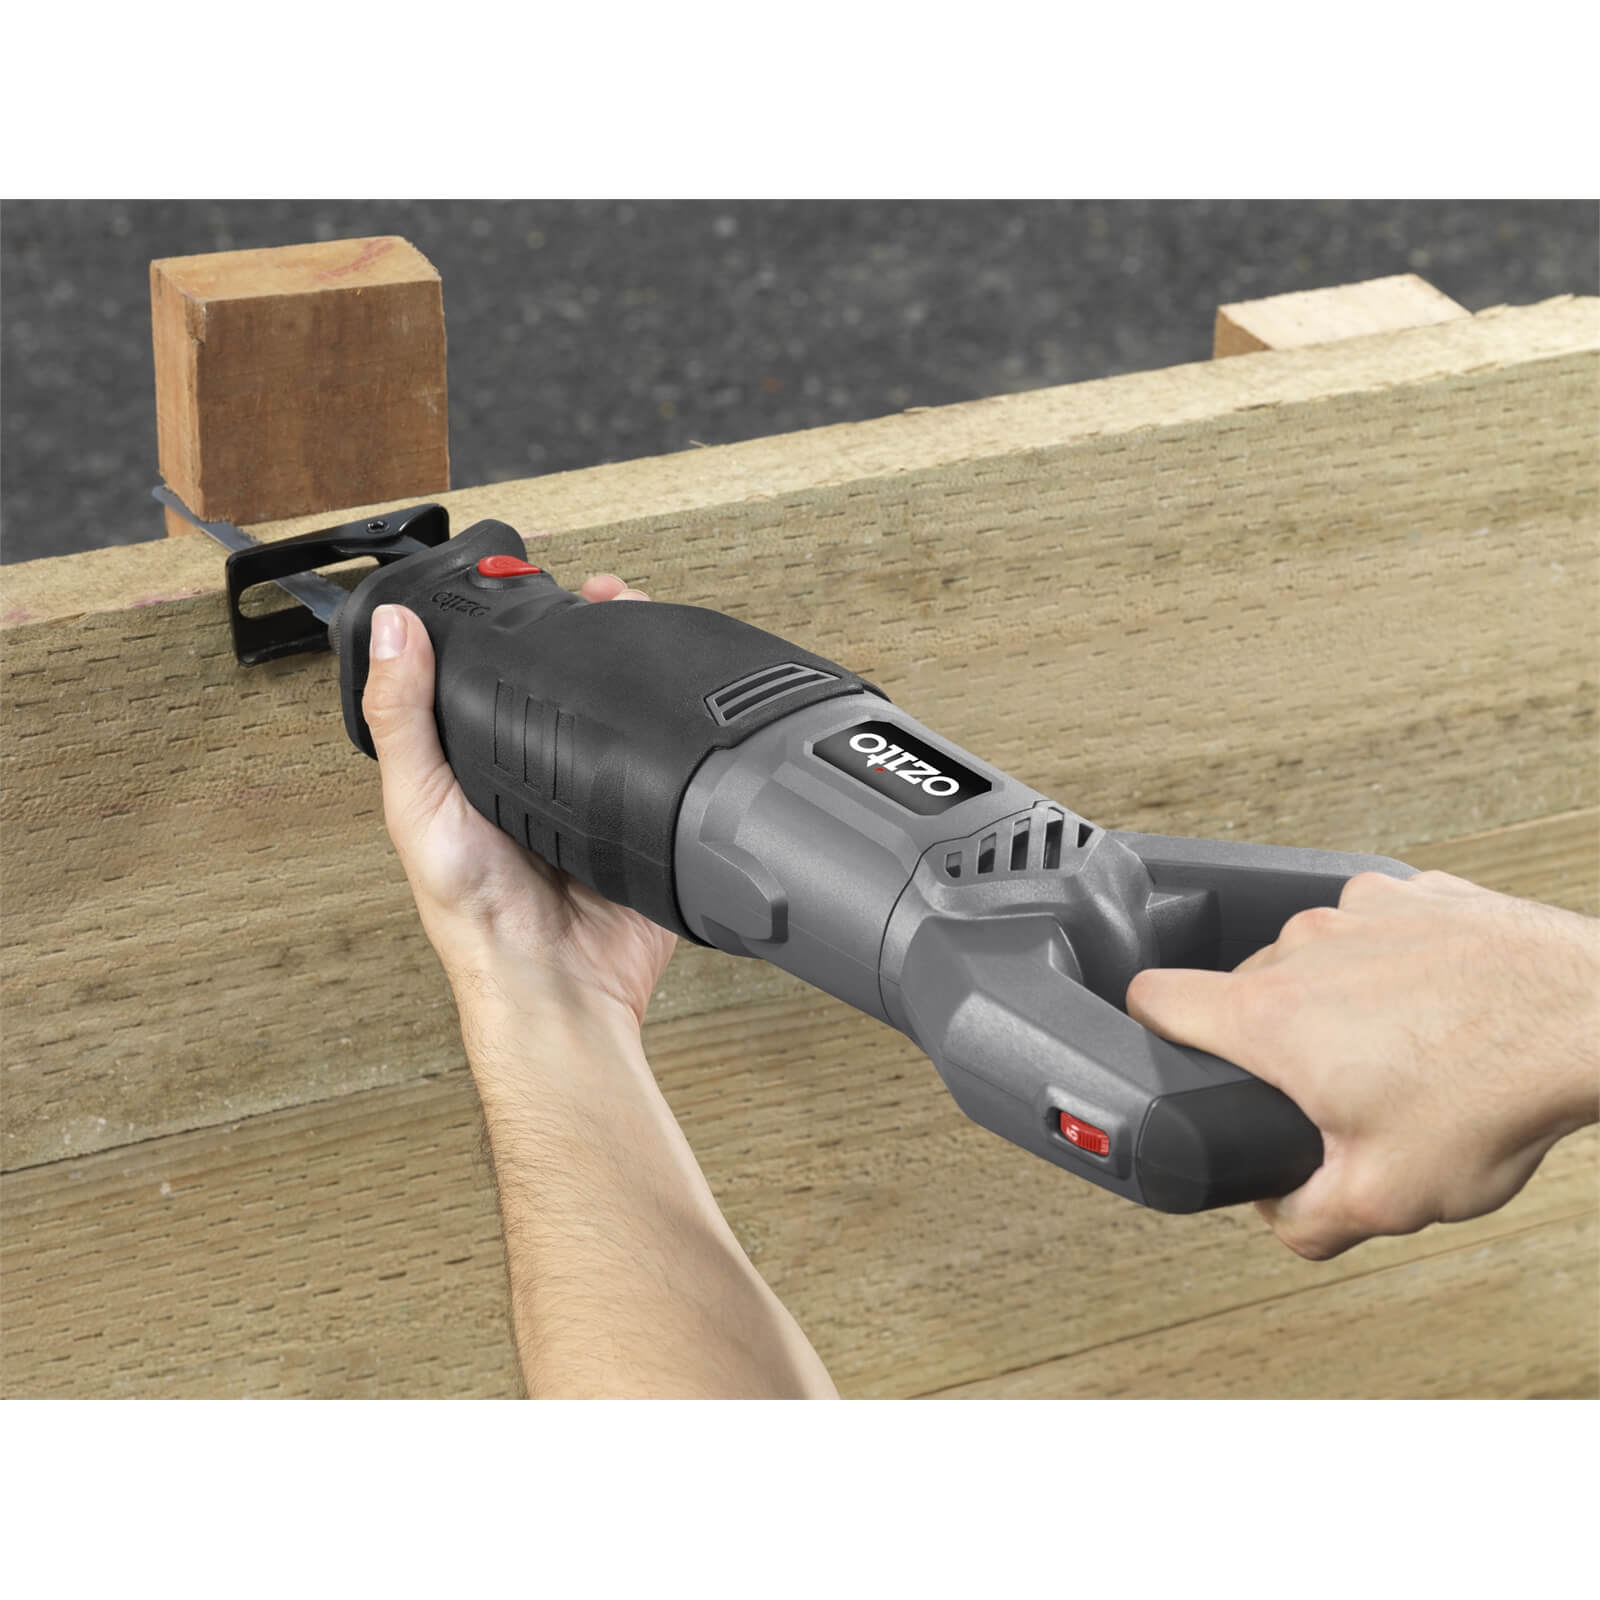 Ozito by Einhell 920W Variable Speed Reciprocating Saw